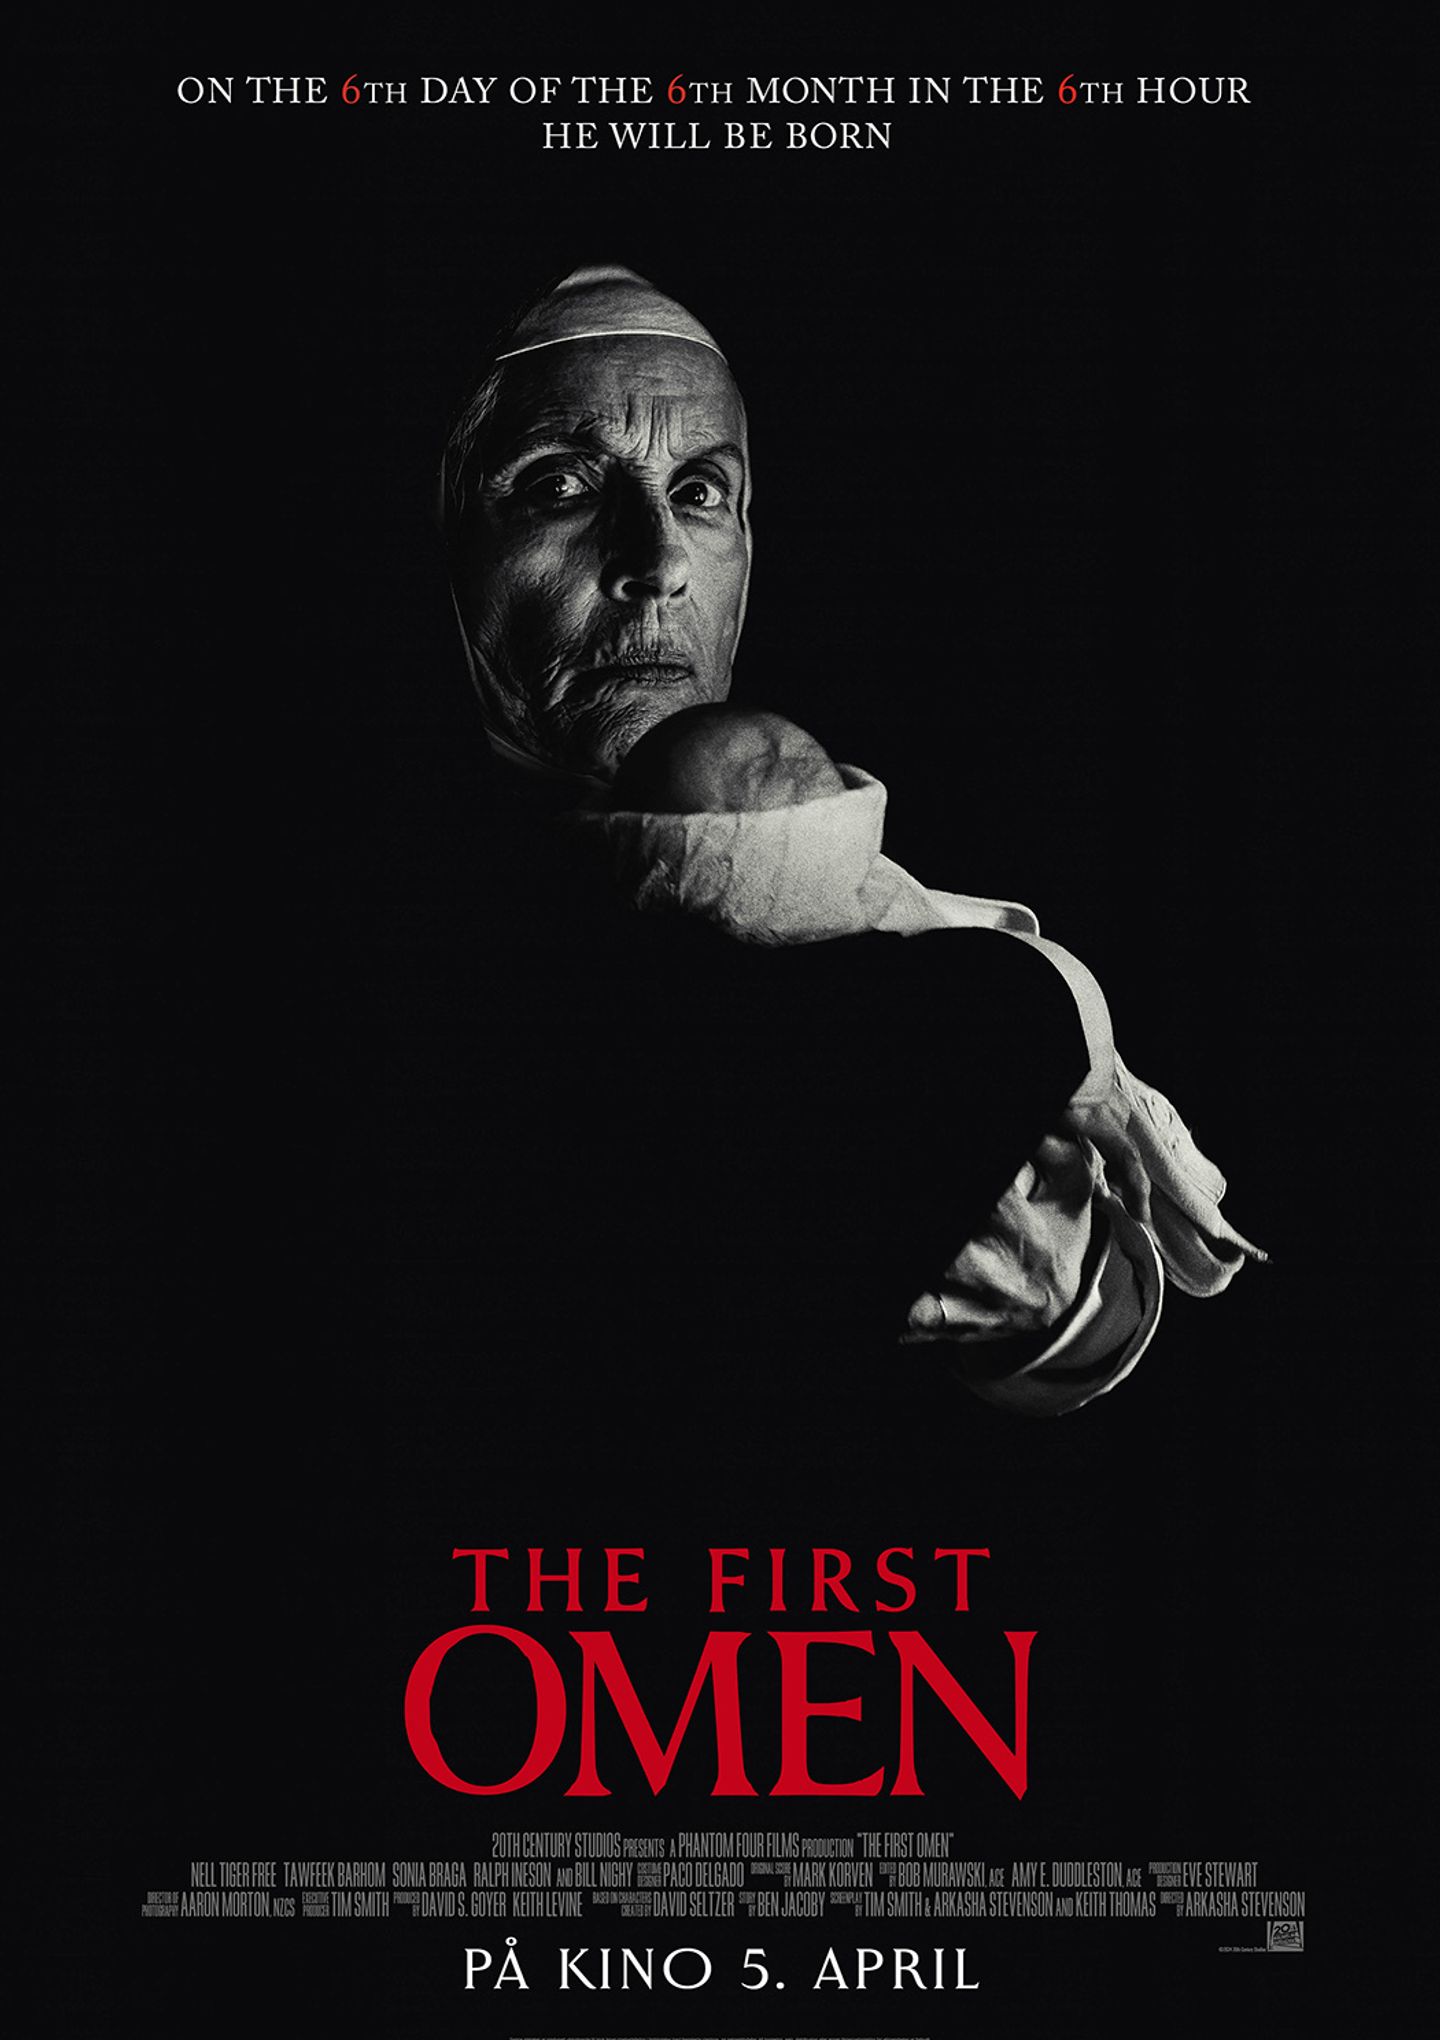 Plakat for 'The First Omen'